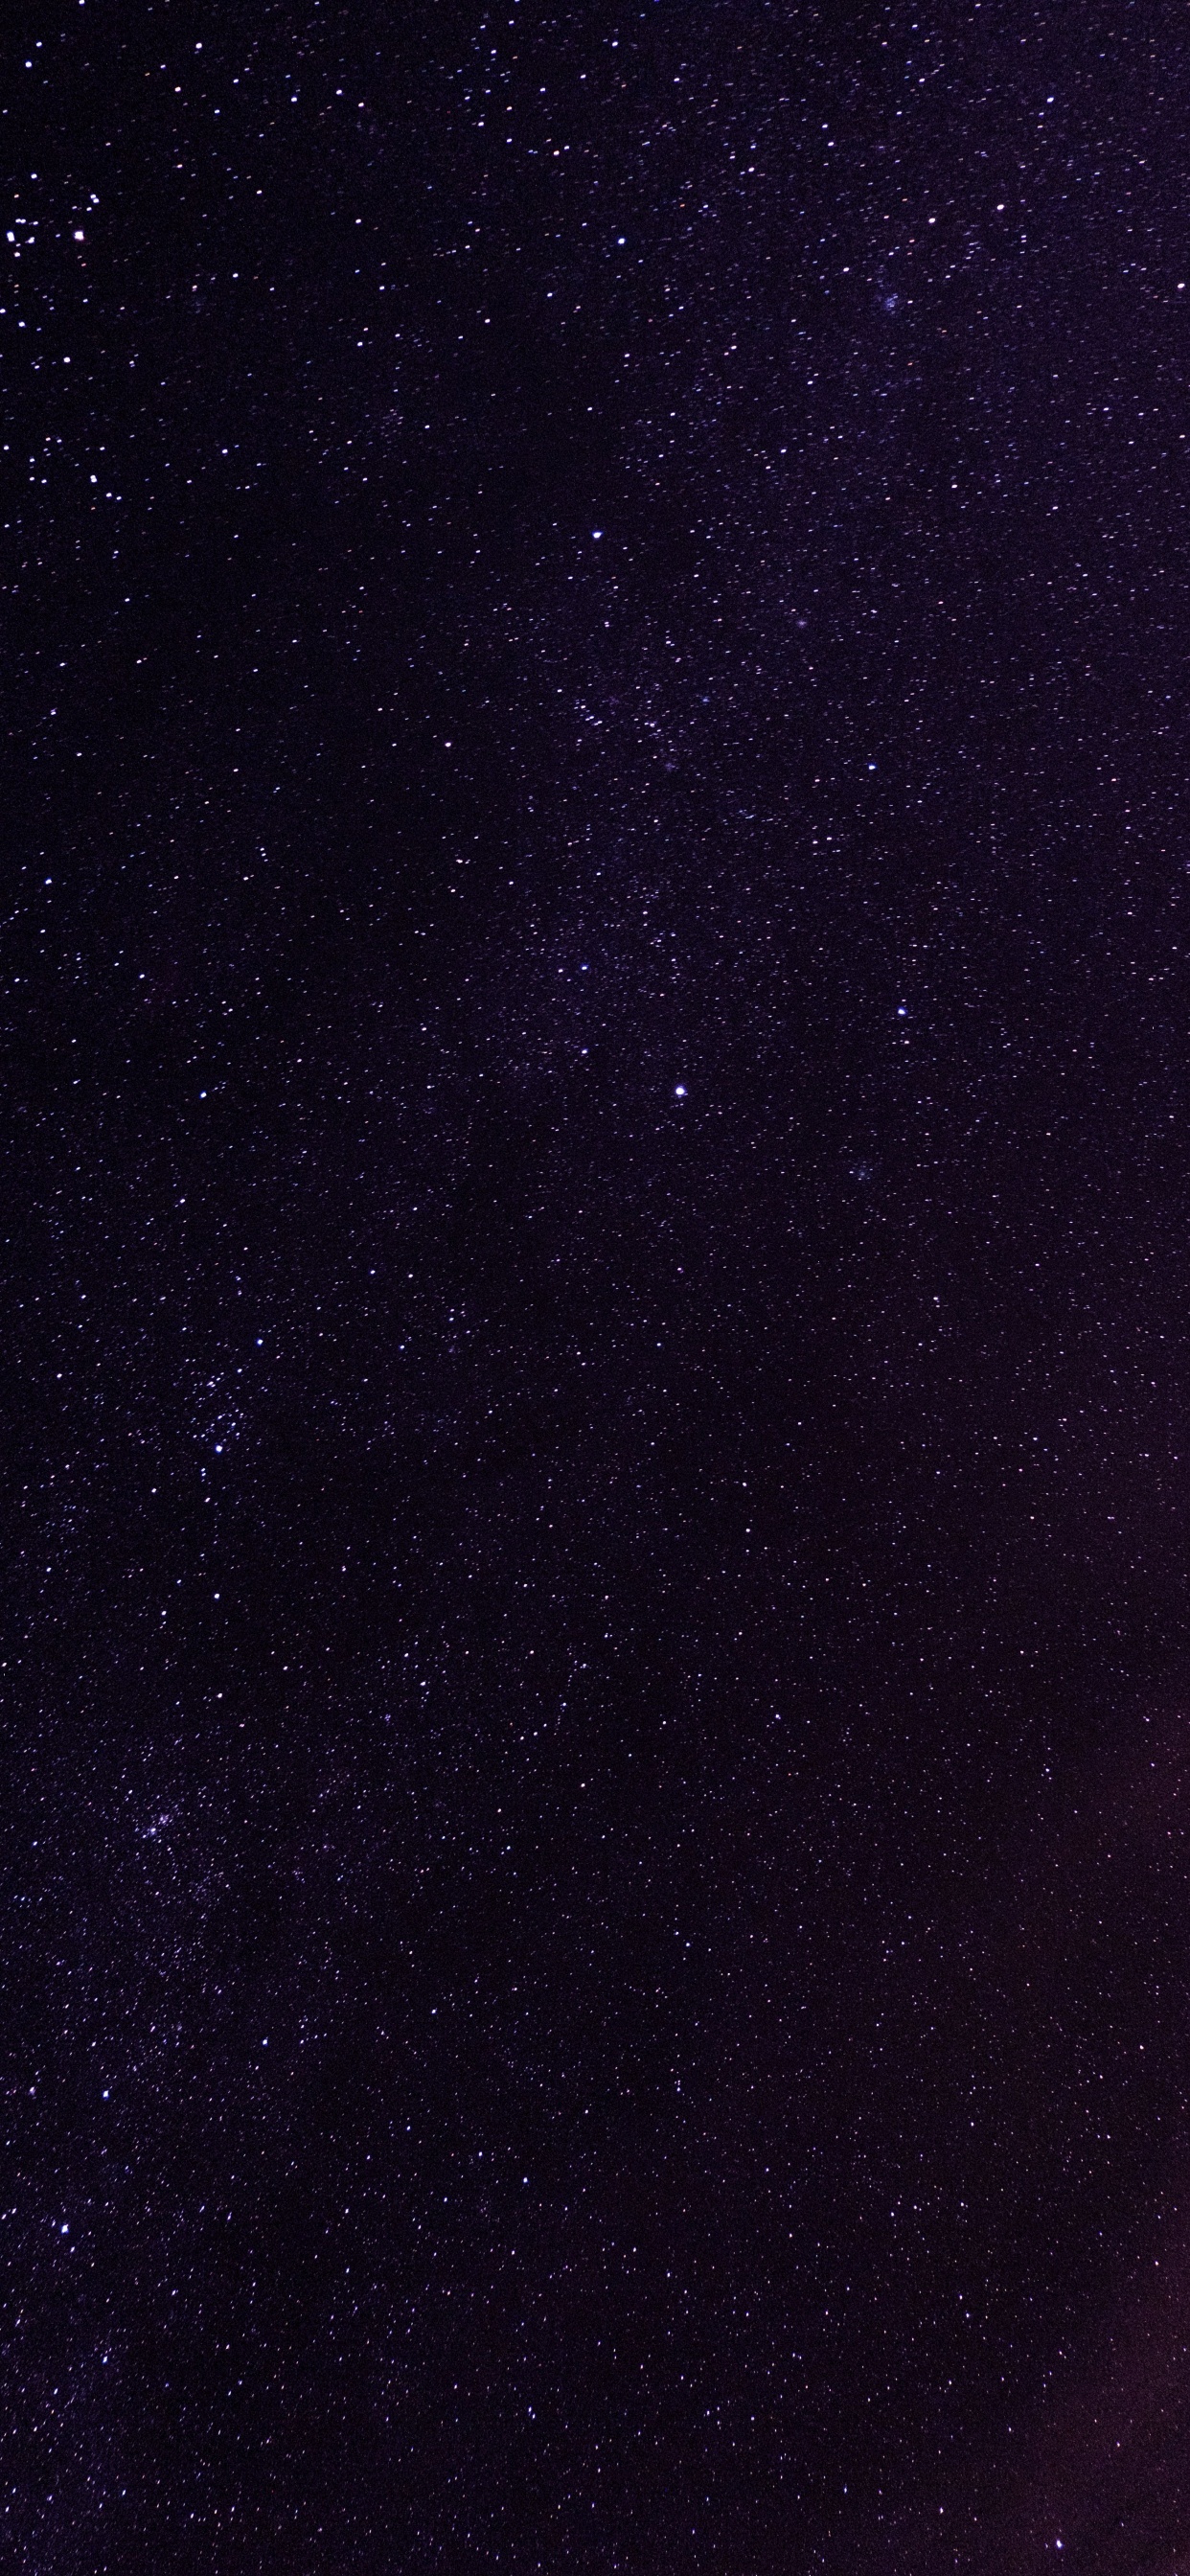 Starry Night Sky Over The Starry Night. Wallpaper in 1242x2688 Resolution